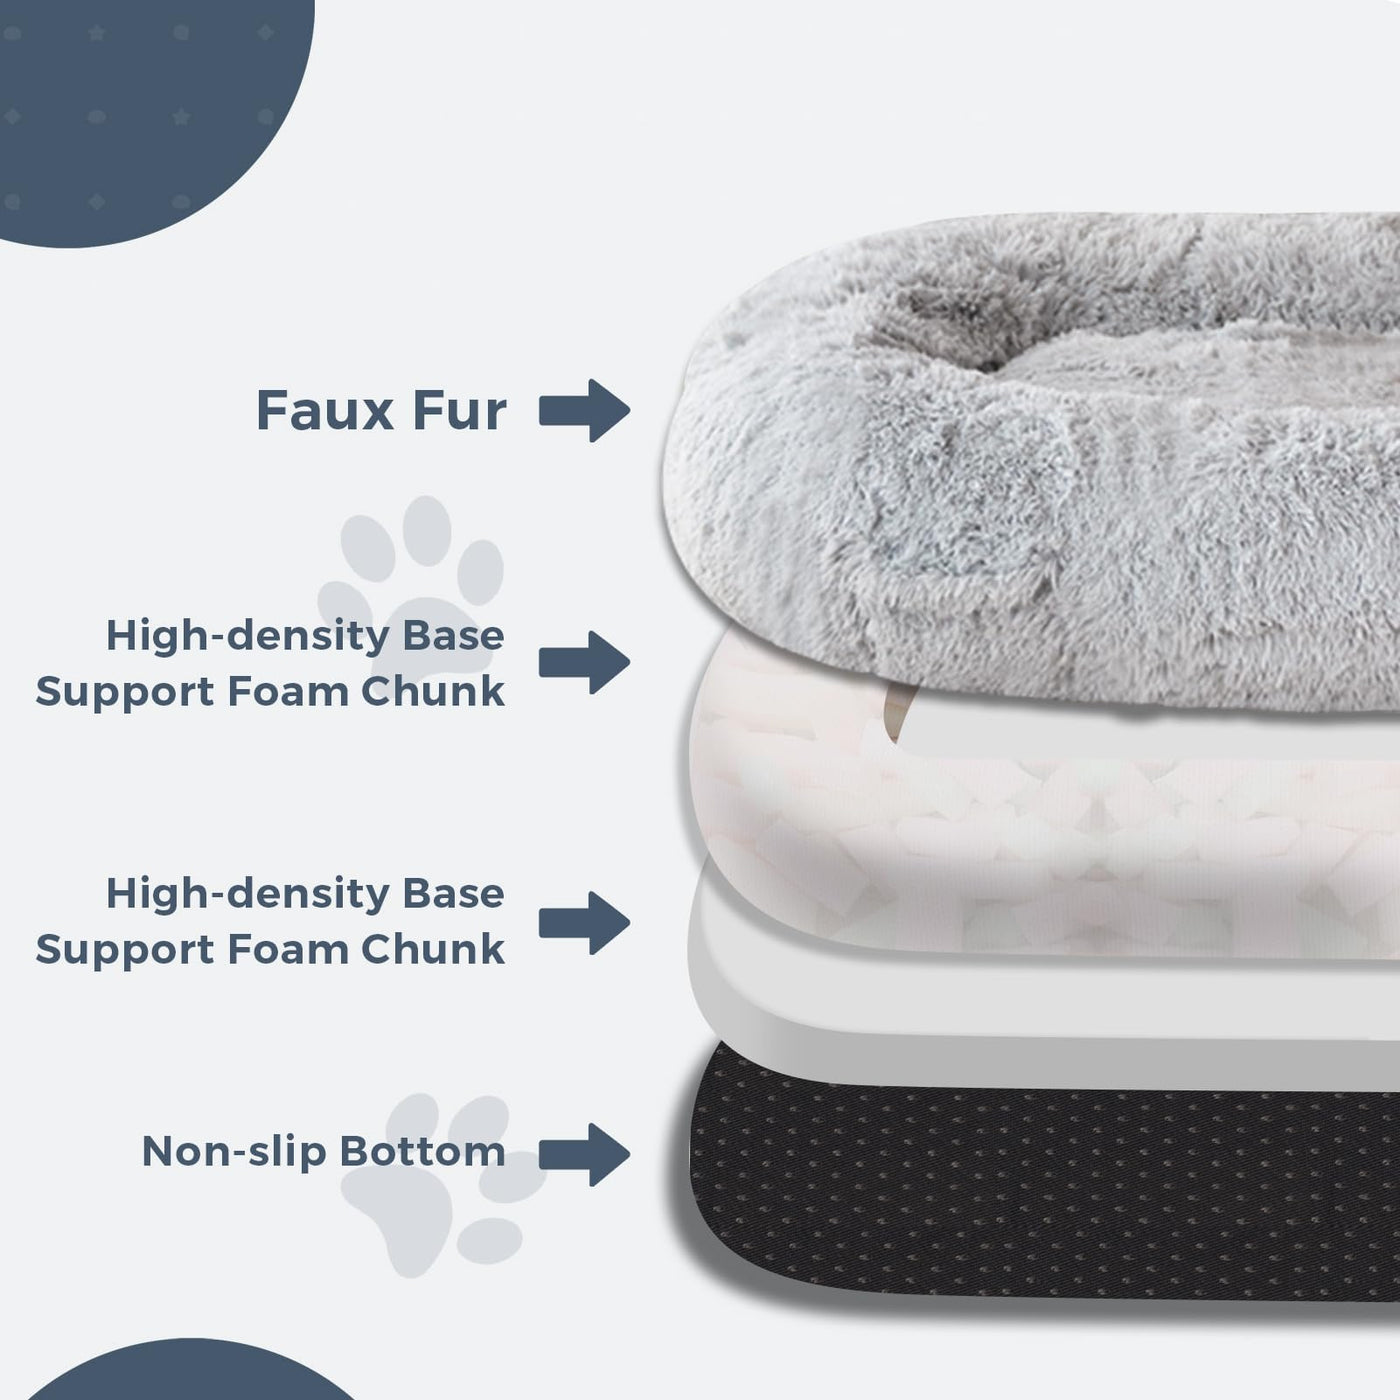 MAXYOYO Human Dog Bed, Long Faux Fur Giant Bean Bag Bed for Humans and Pets, Faux Fur Grey